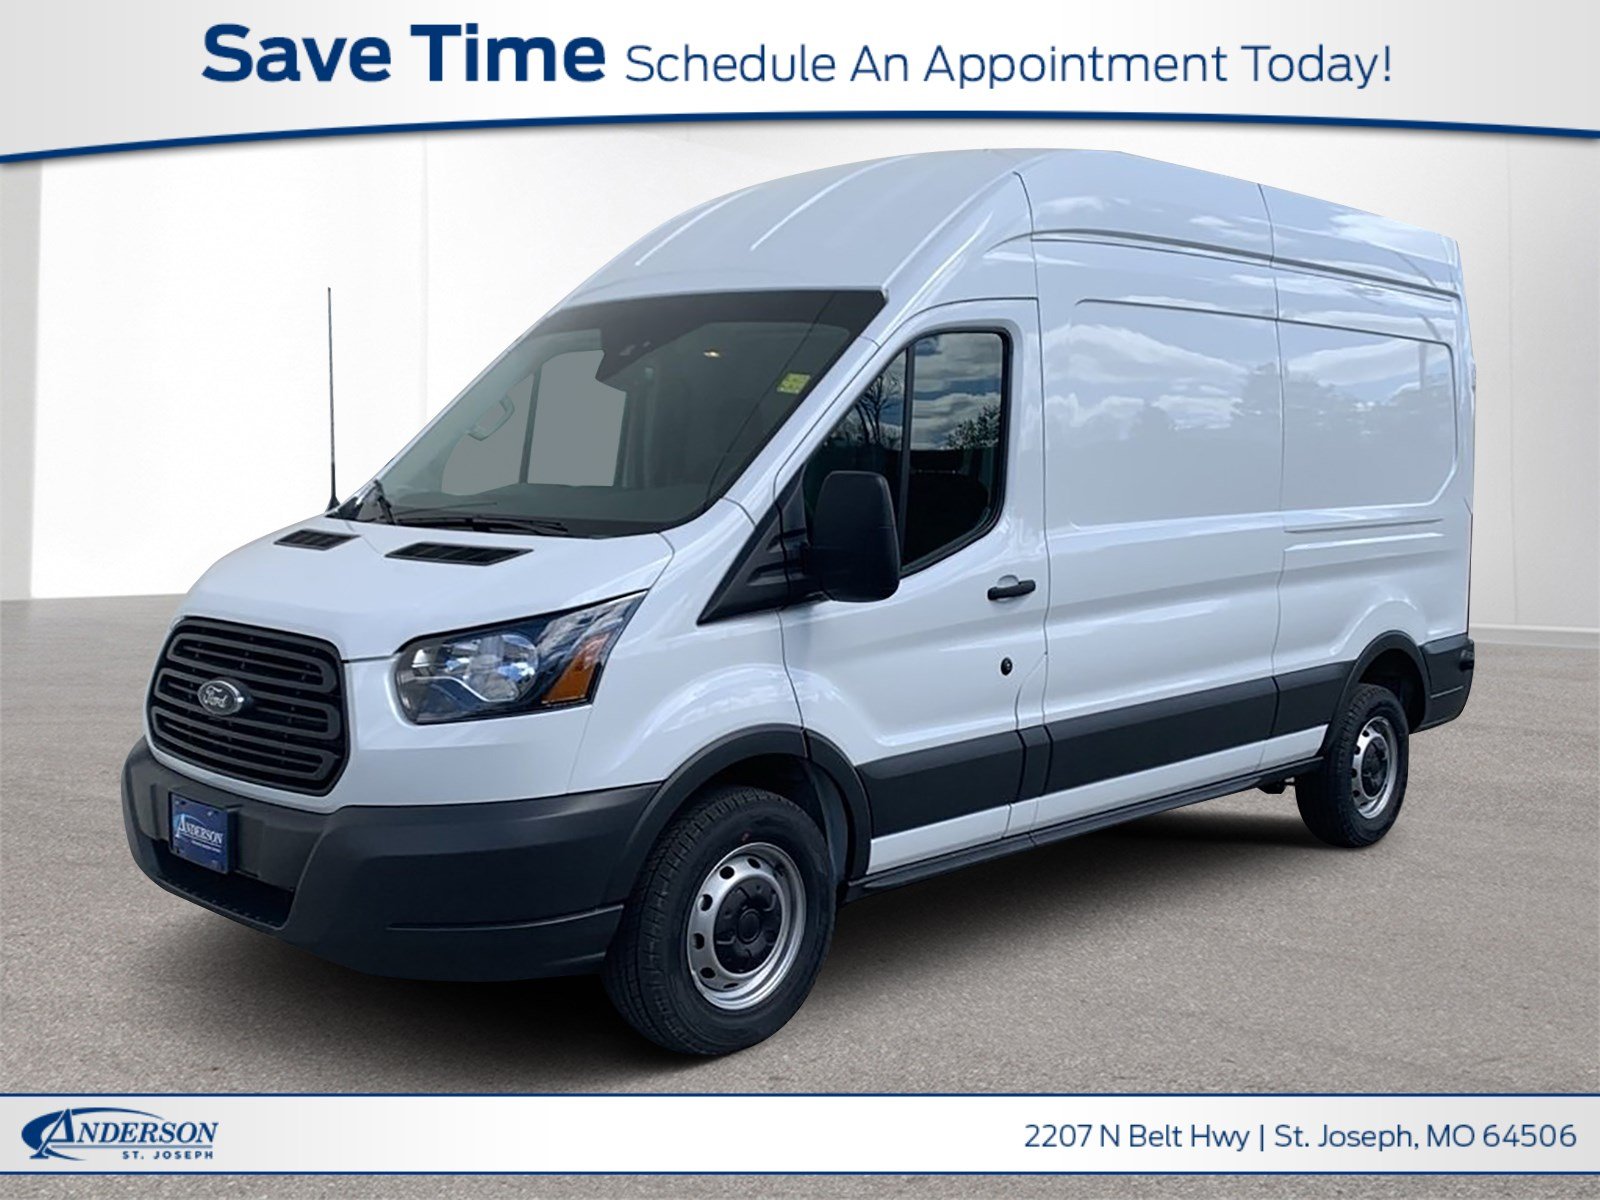 Greatest Ford Ford Vans For Sale